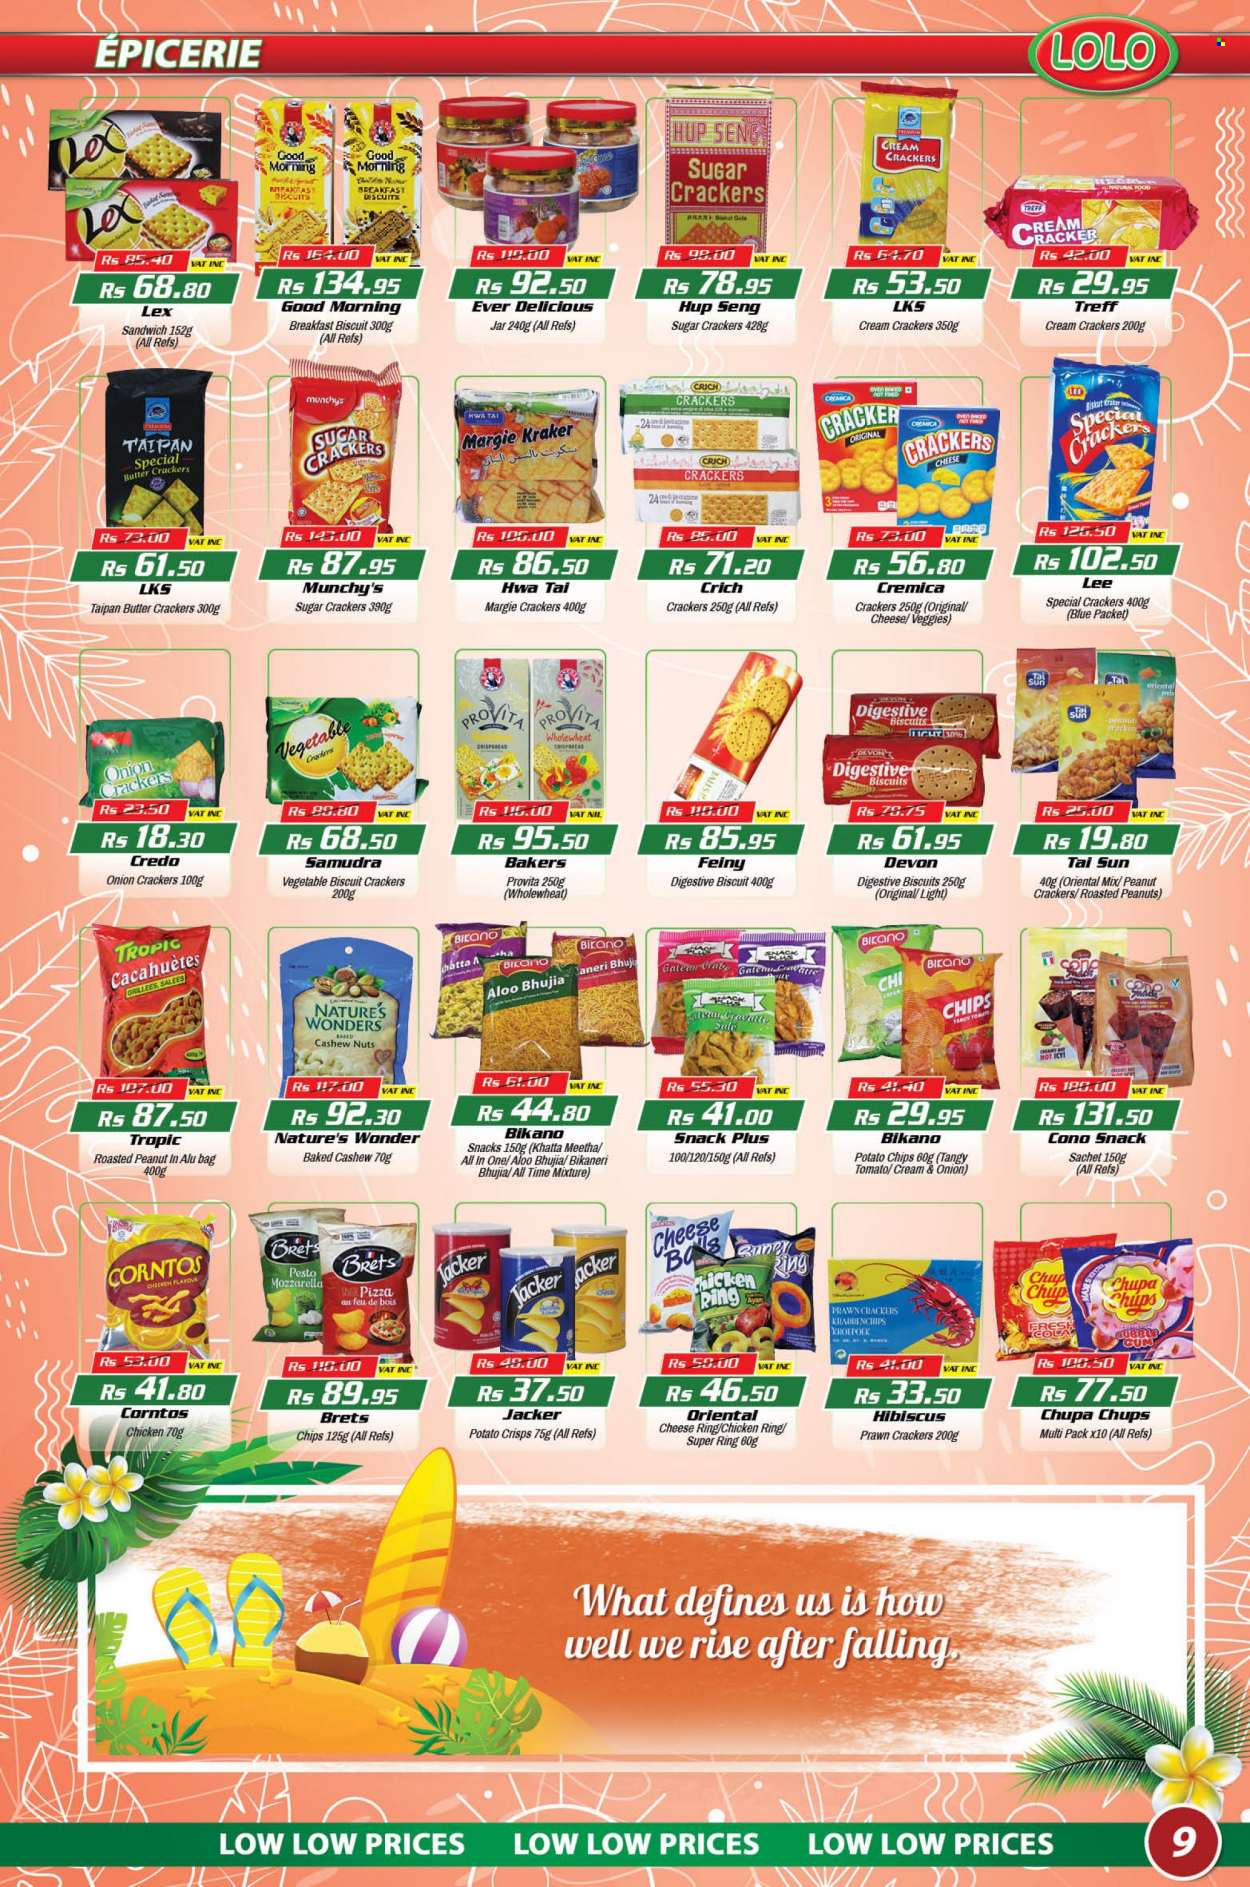 LOLO Hyper Catalogue - 26.08.2022 - 15.09.2022 - Sales products - crispbread, prawns, pizza, butter, snack, crackers, biscuit, Digestive, potato crisps, potato chips, chips, sugar, bhujia, cashews, roasted peanuts, peanuts, nuts, Tai Sun, jar, battery, Bakers, Lee, bra, pesto. Page 9.